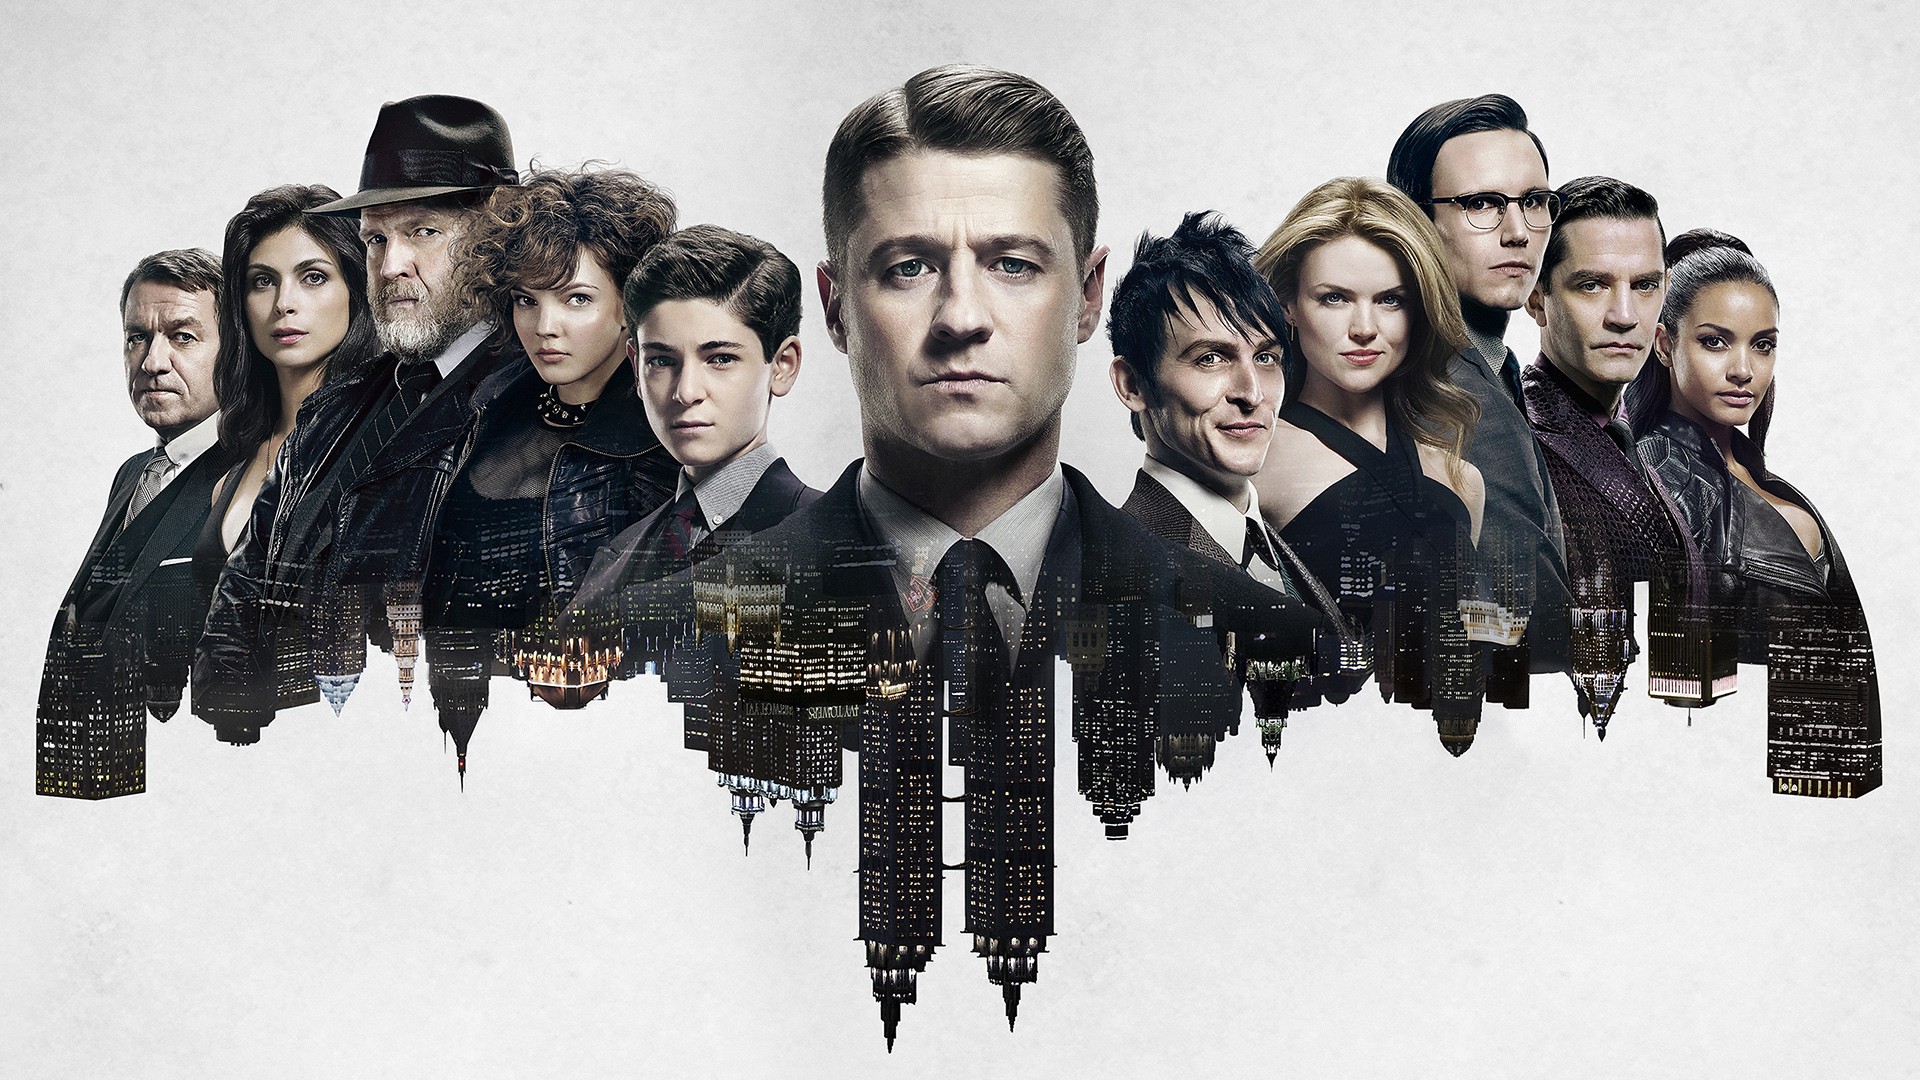 General 1920x1080 Gotham The Upside Down frontal view centered simple background upside down white background smiling TV series promotional